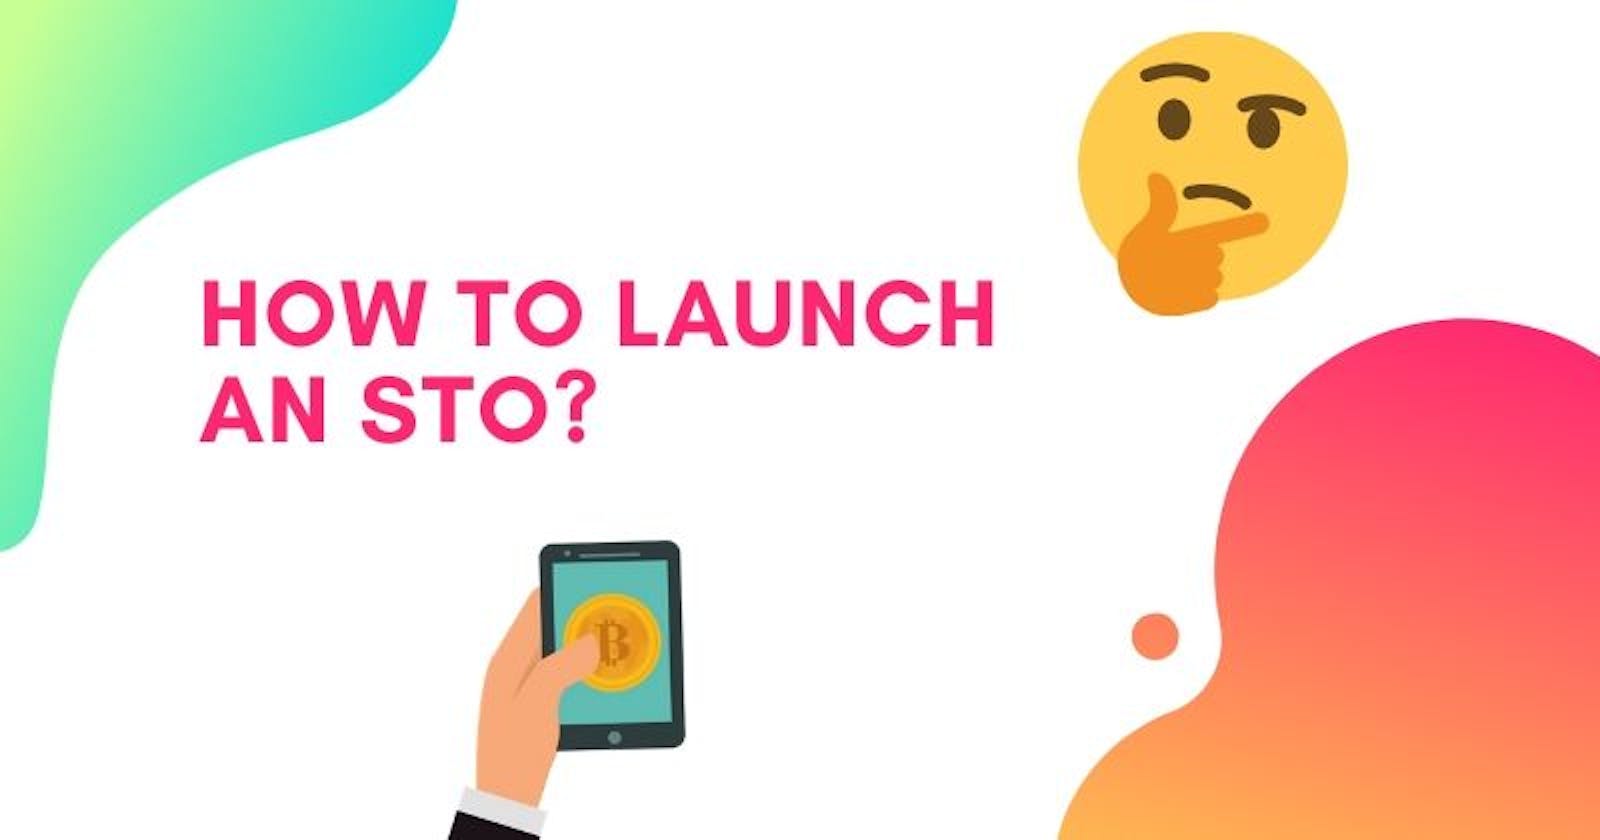 How to launch an STO?